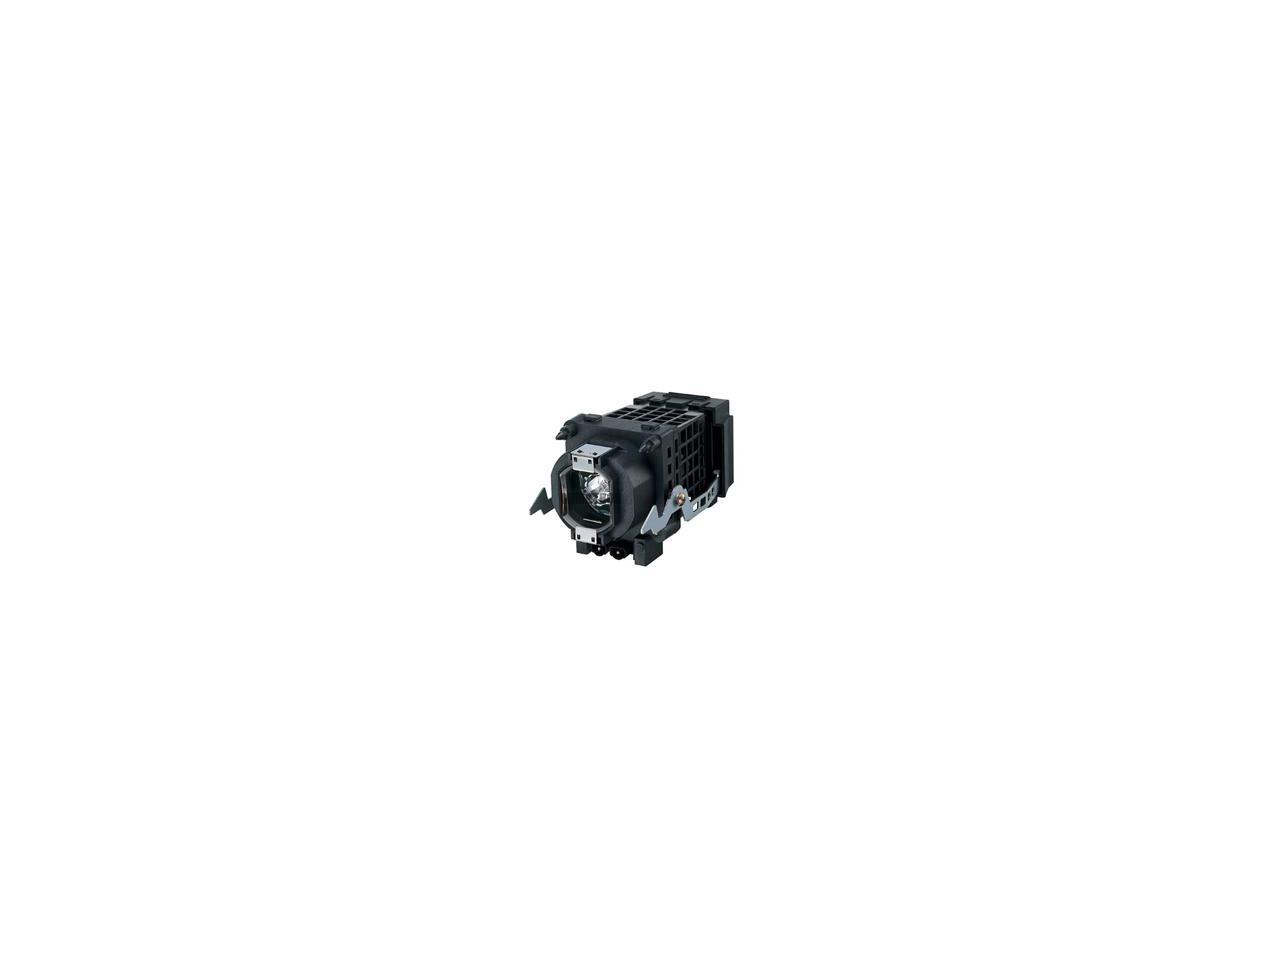 Sony XL-2400 equivalent generic oem projection TV replacement lamp with